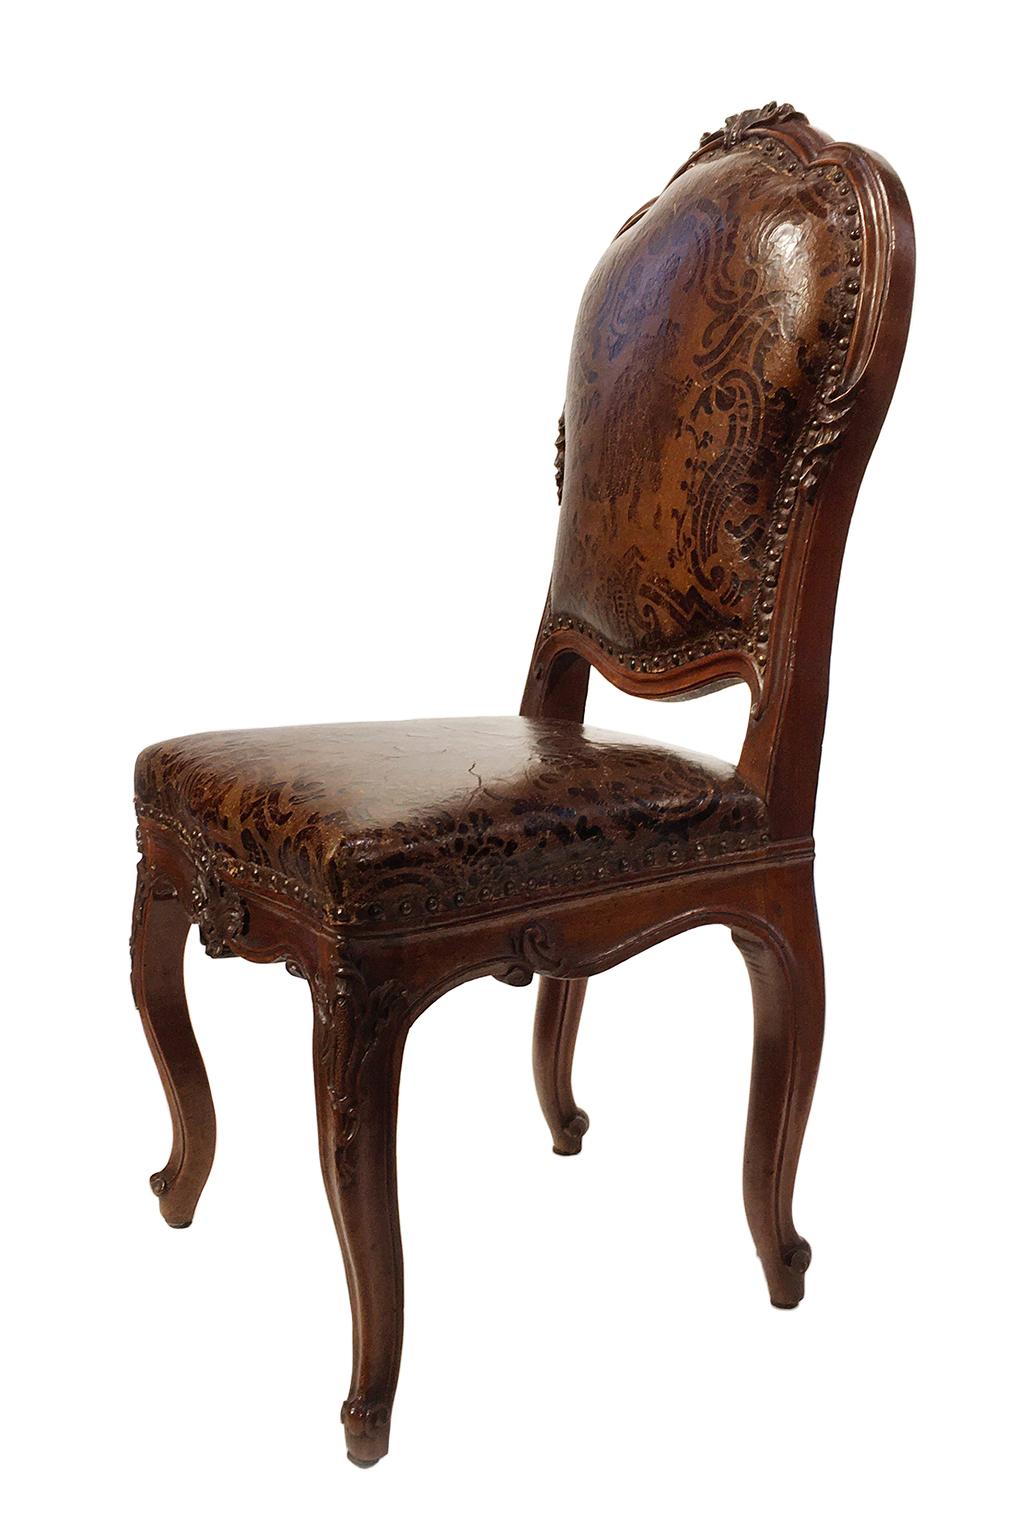 Mid-18th Century Italian Carved Walnut Chairs with Leather Covers, Milan, circa 1750 For Sale